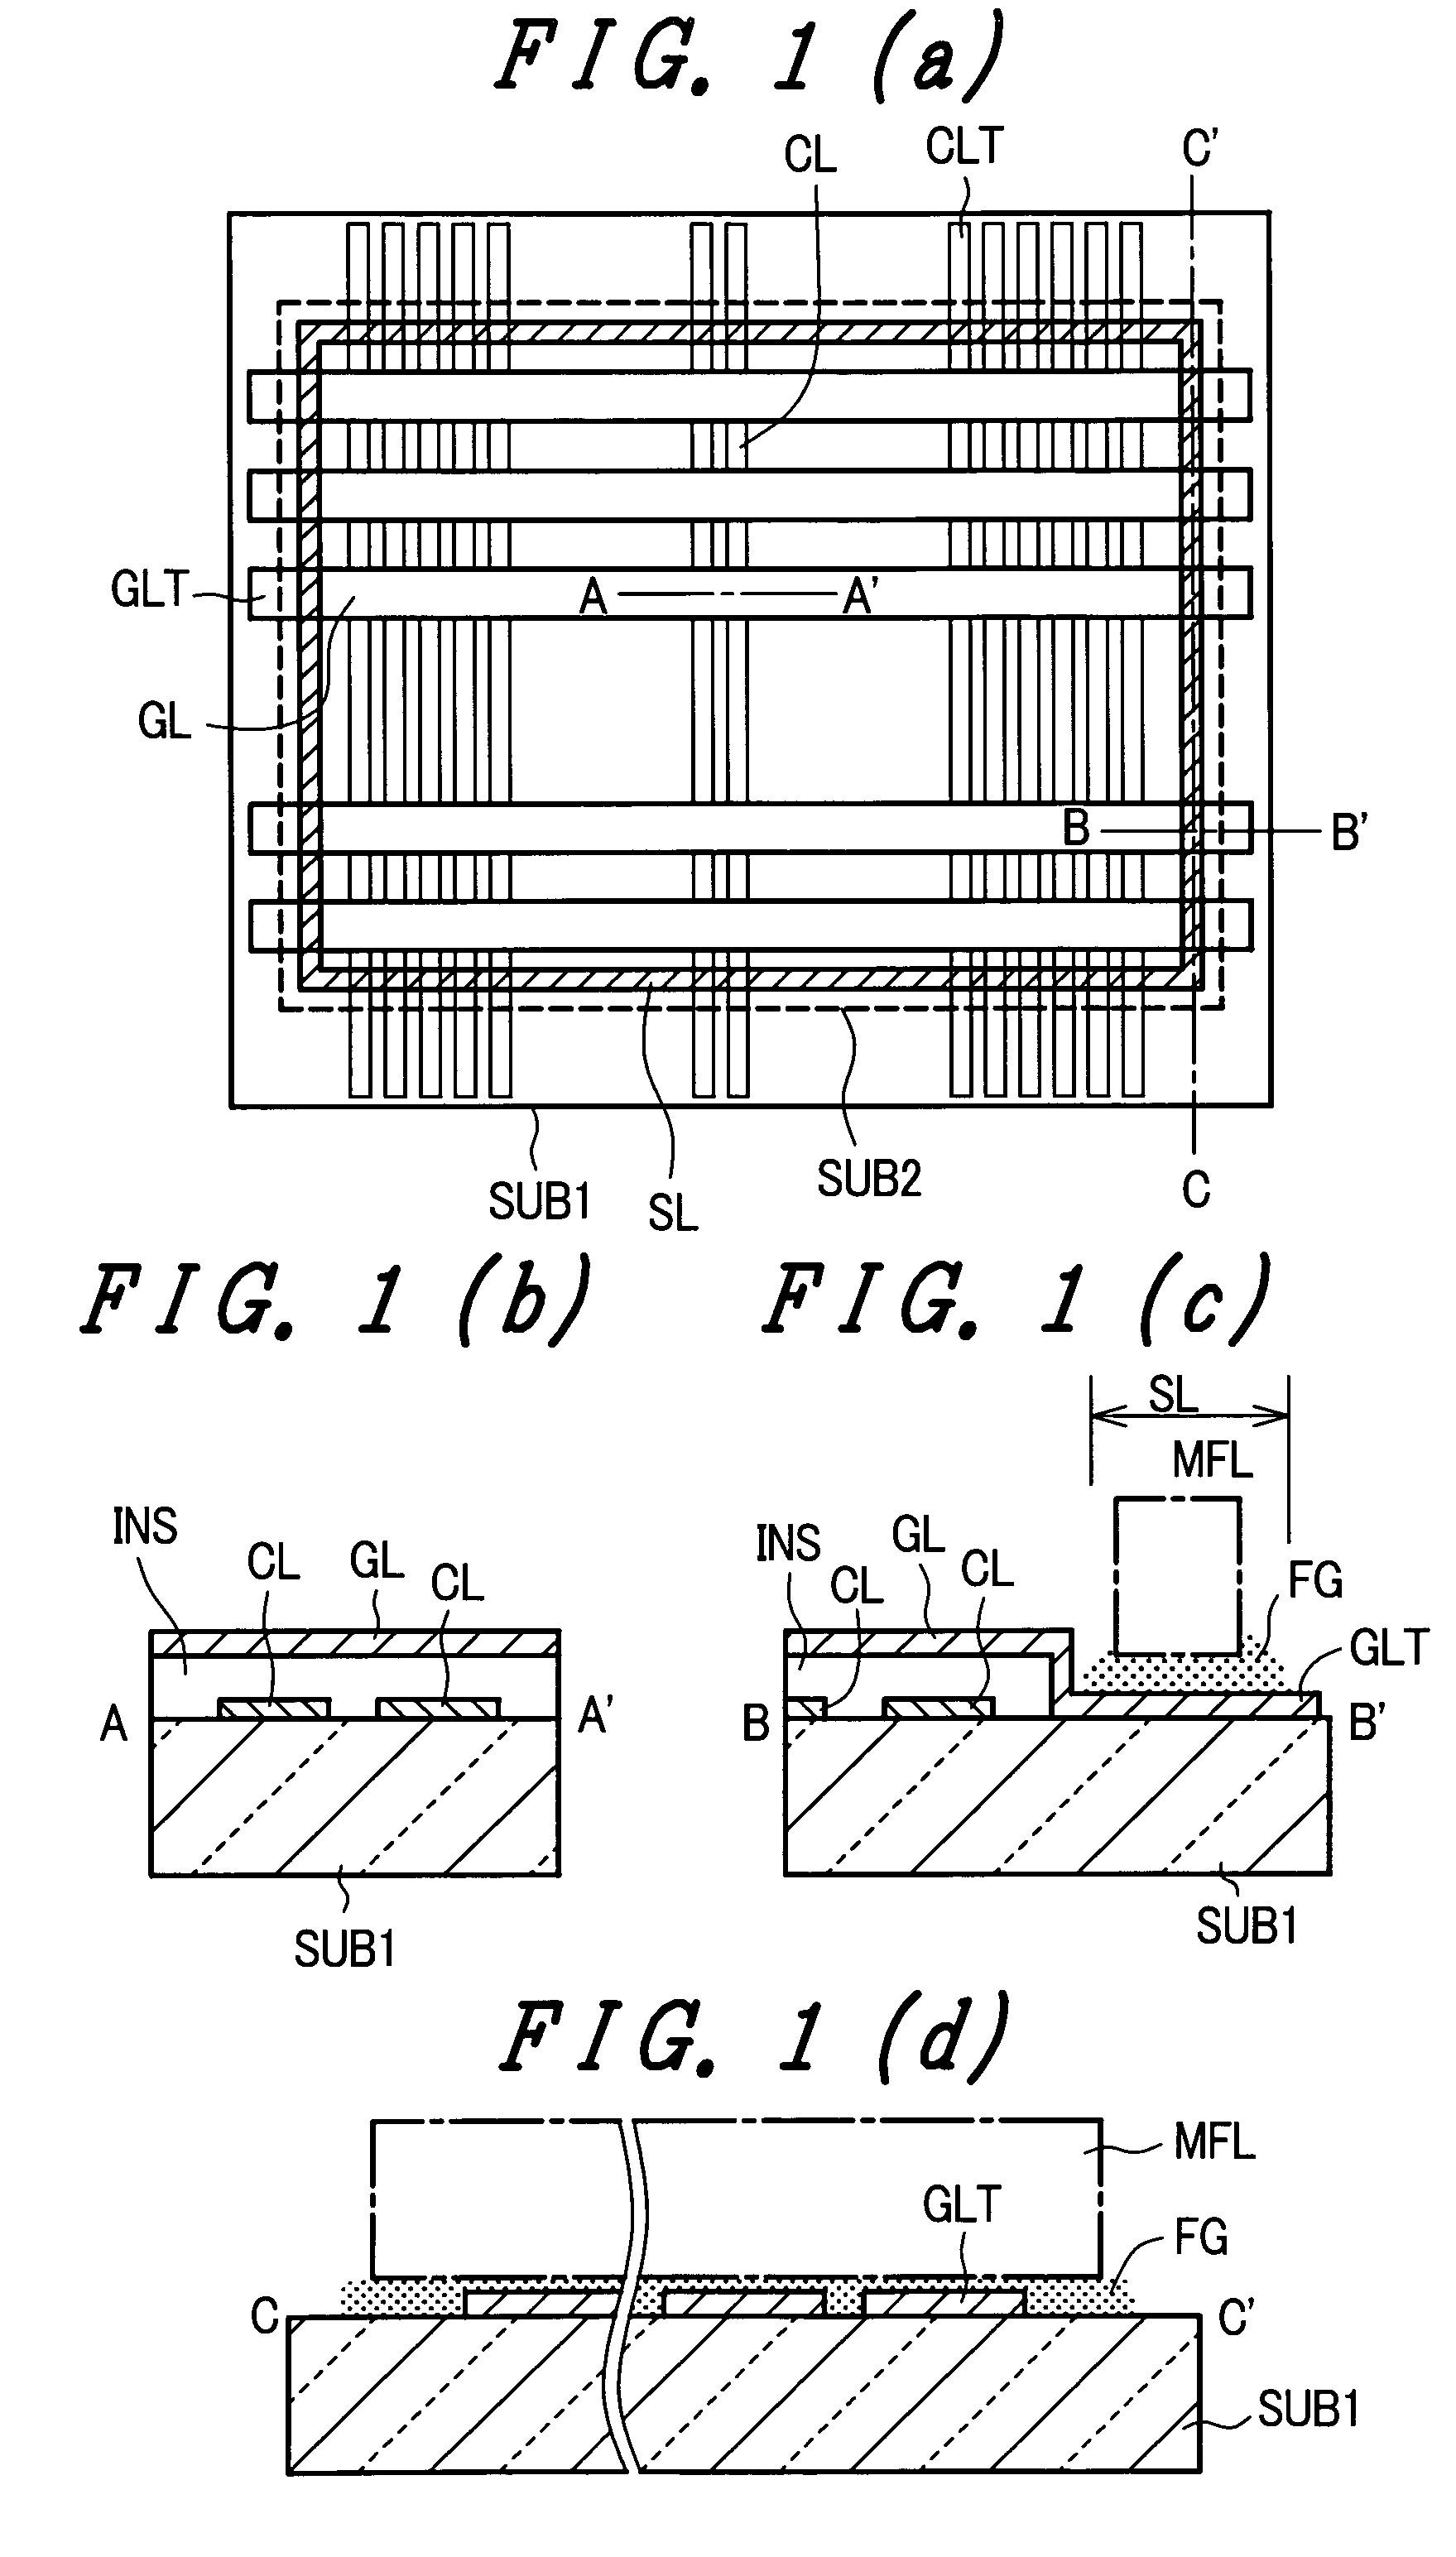 Self-luminous planar display device and manufacturing method thereof